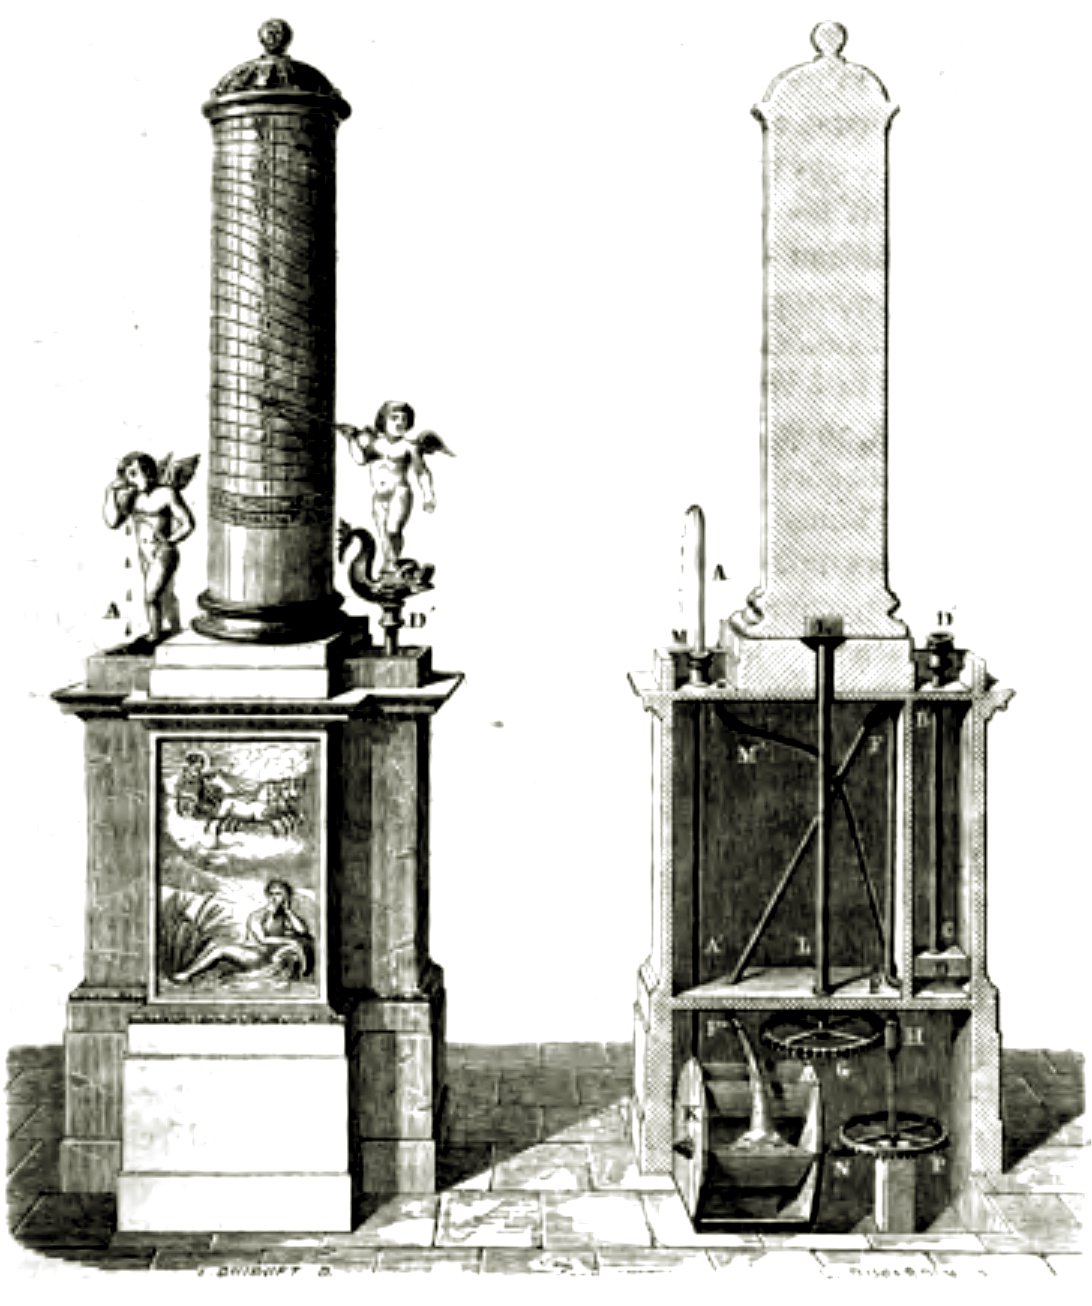 Ctesibius' water clock, as visualized by the 17th-century French architect Claude Perrault